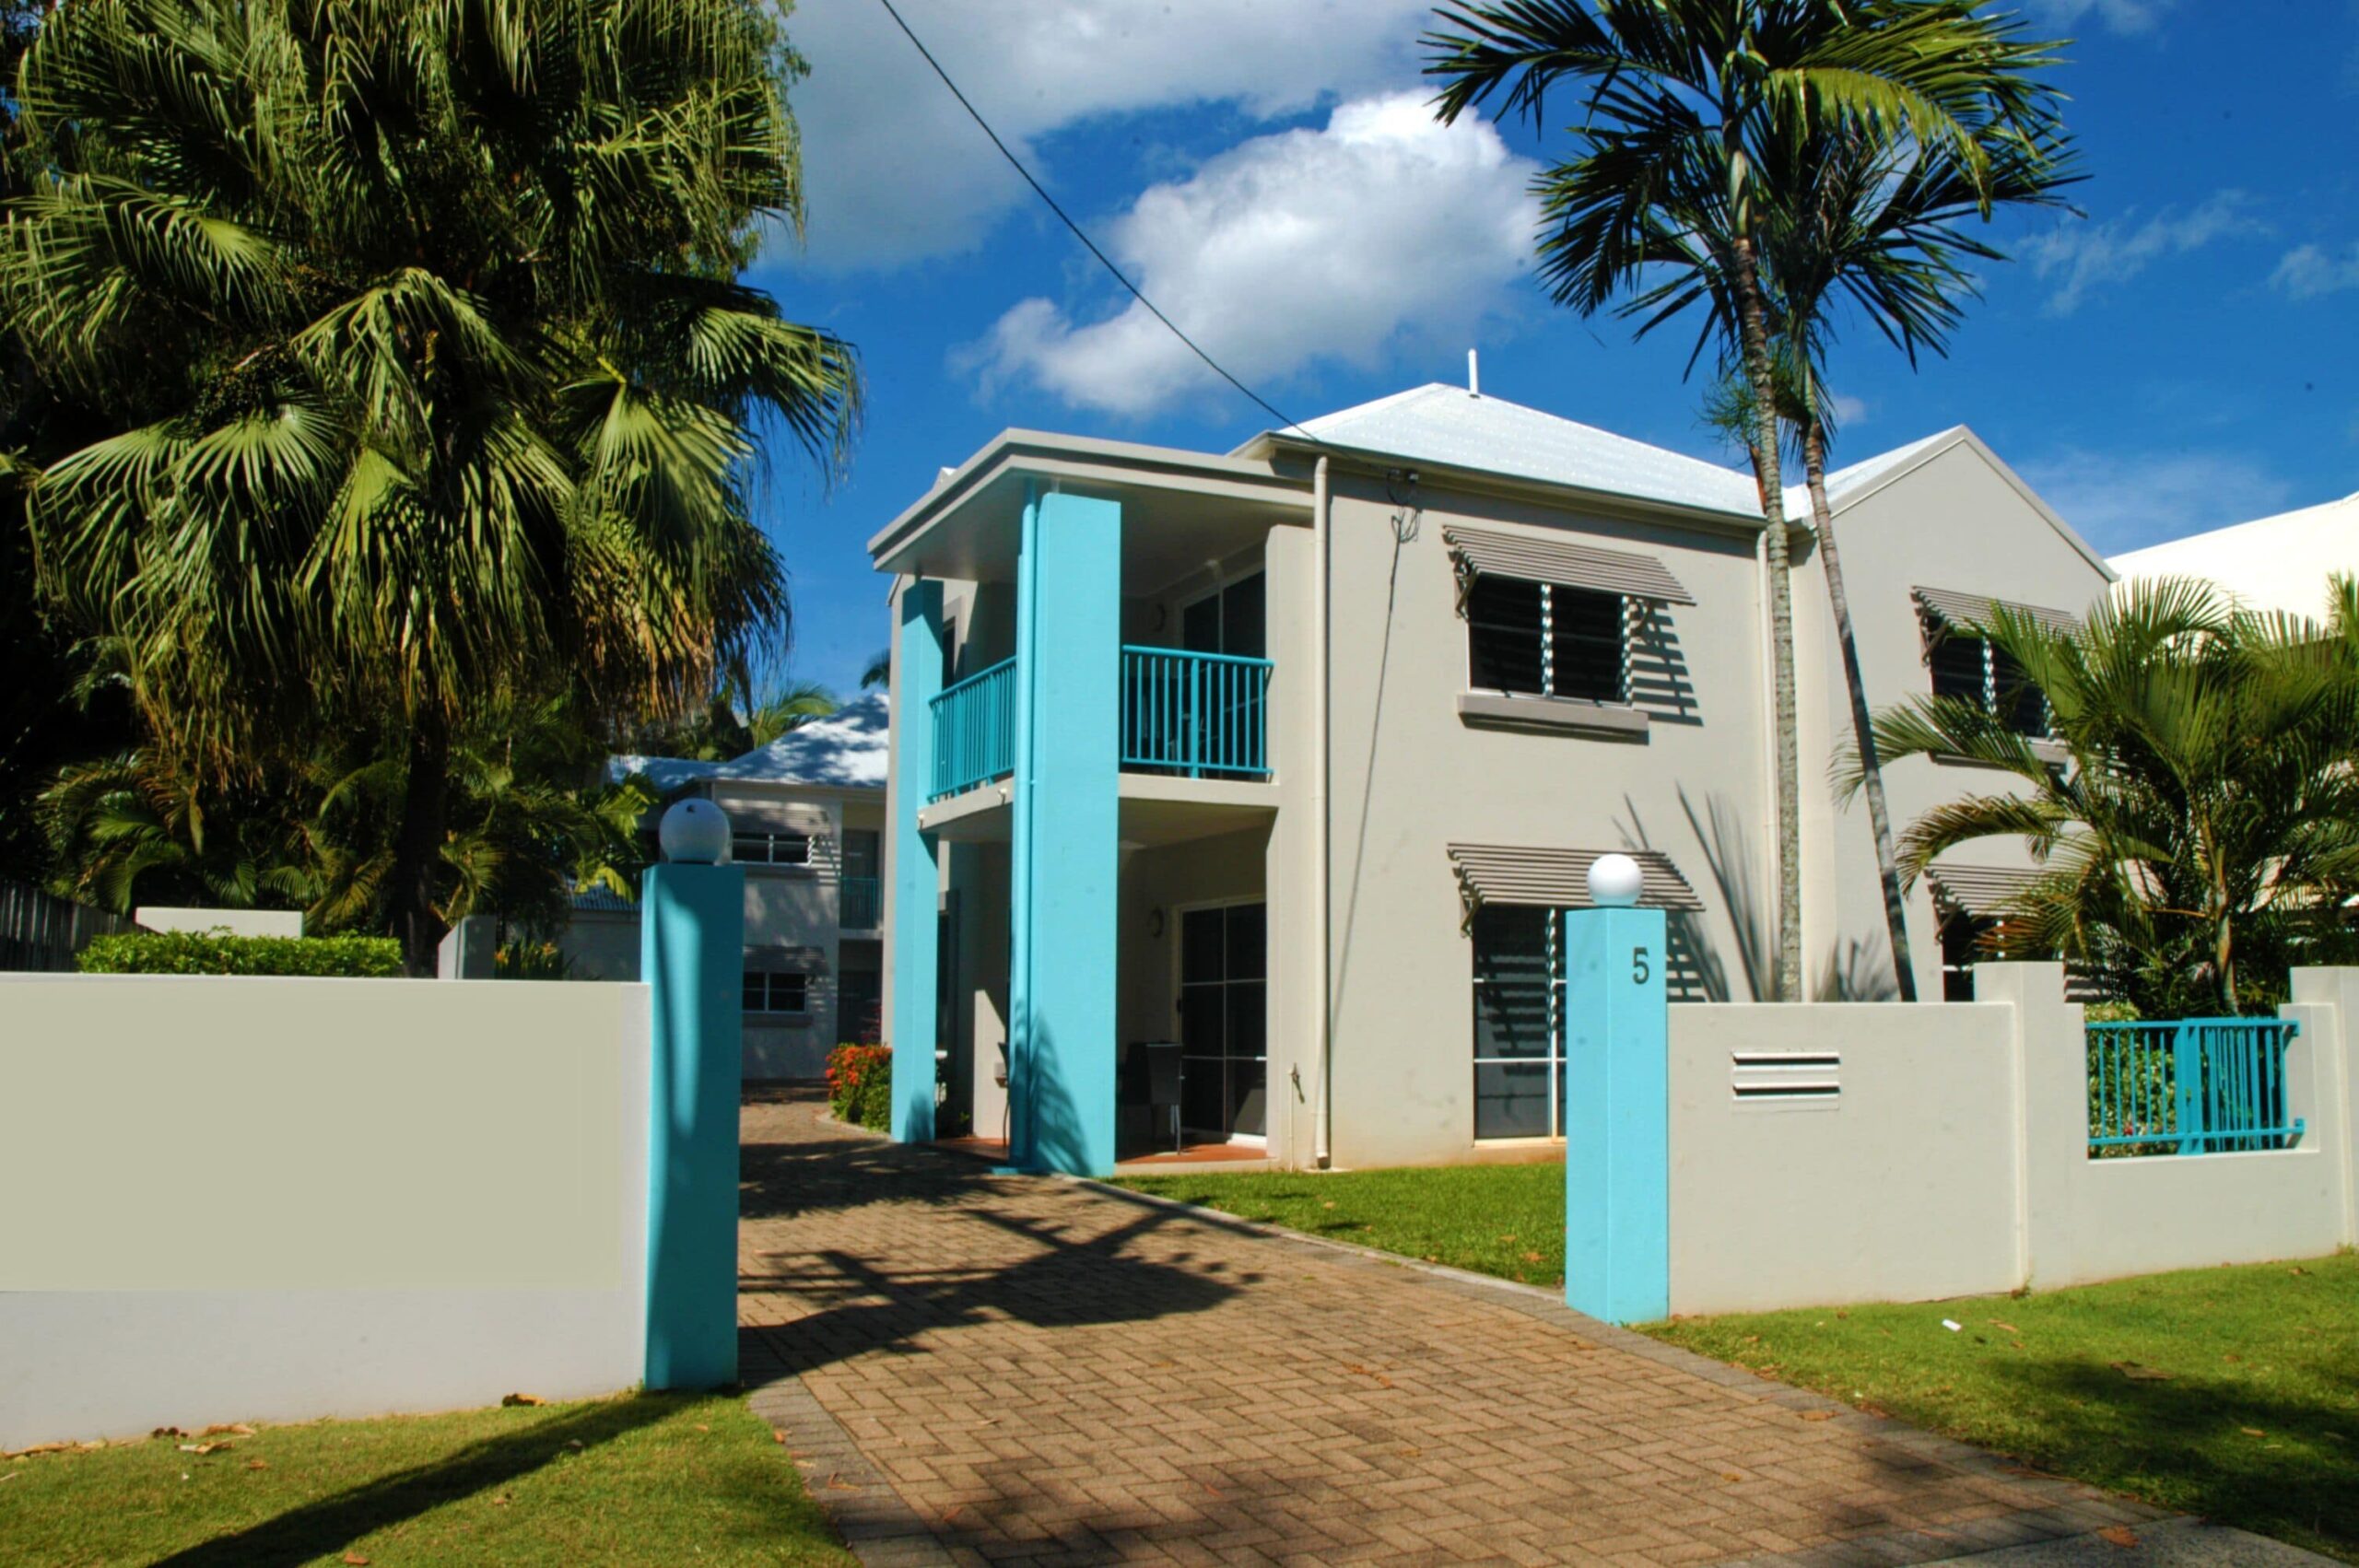 The Reef Retreat Townhouses